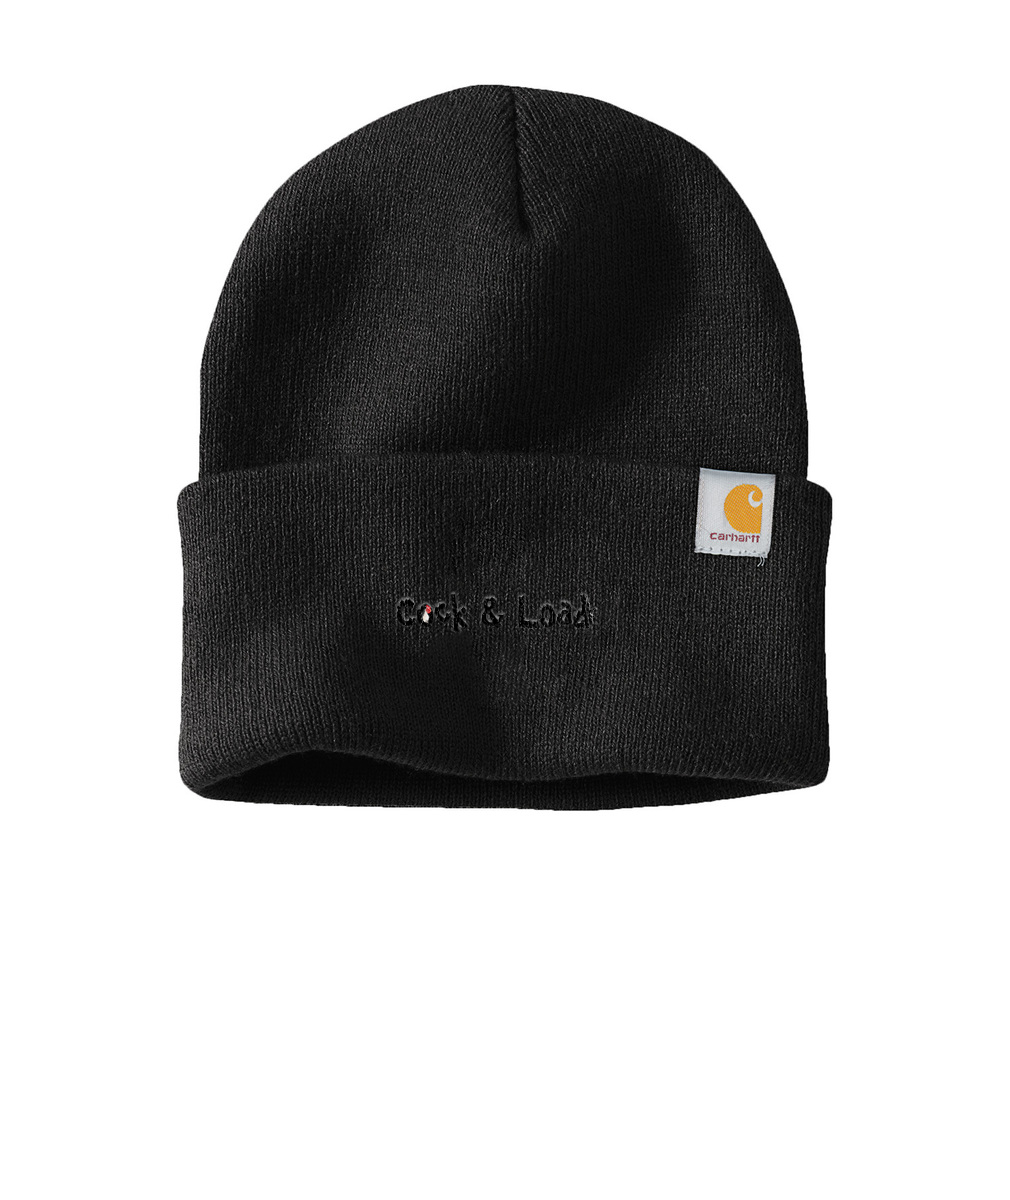 Cock n load Embroidered Carhartt® Watch Cap 2.0 or Similar